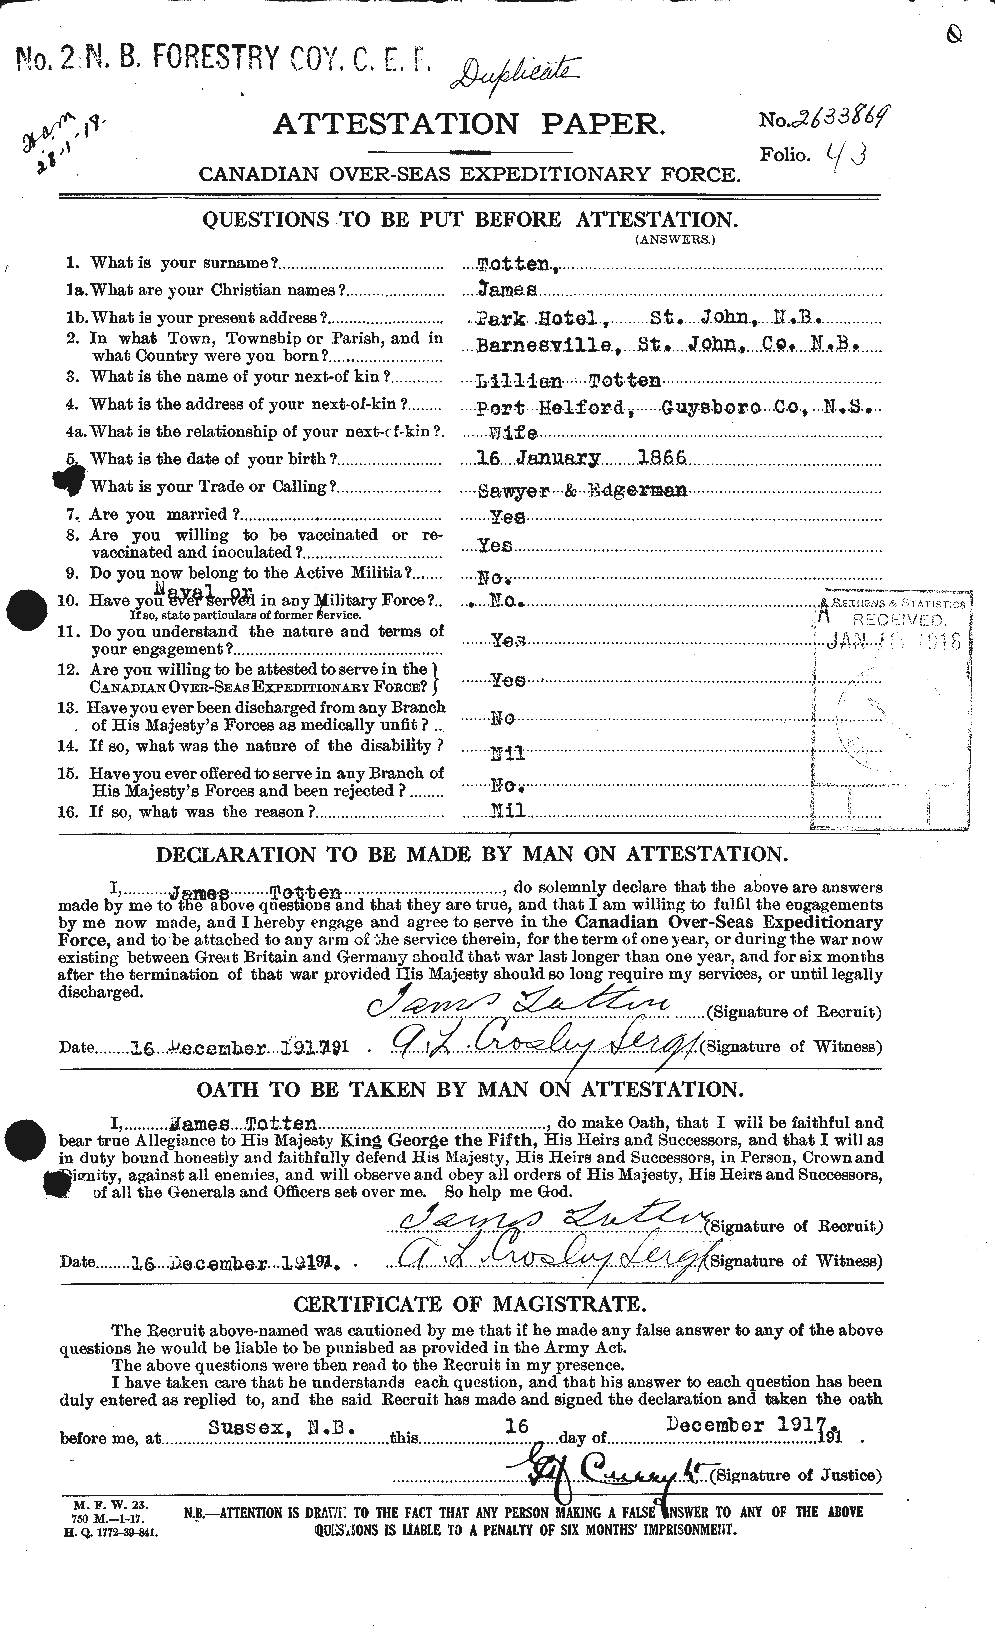 Personnel Records of the First World War - CEF 650072a